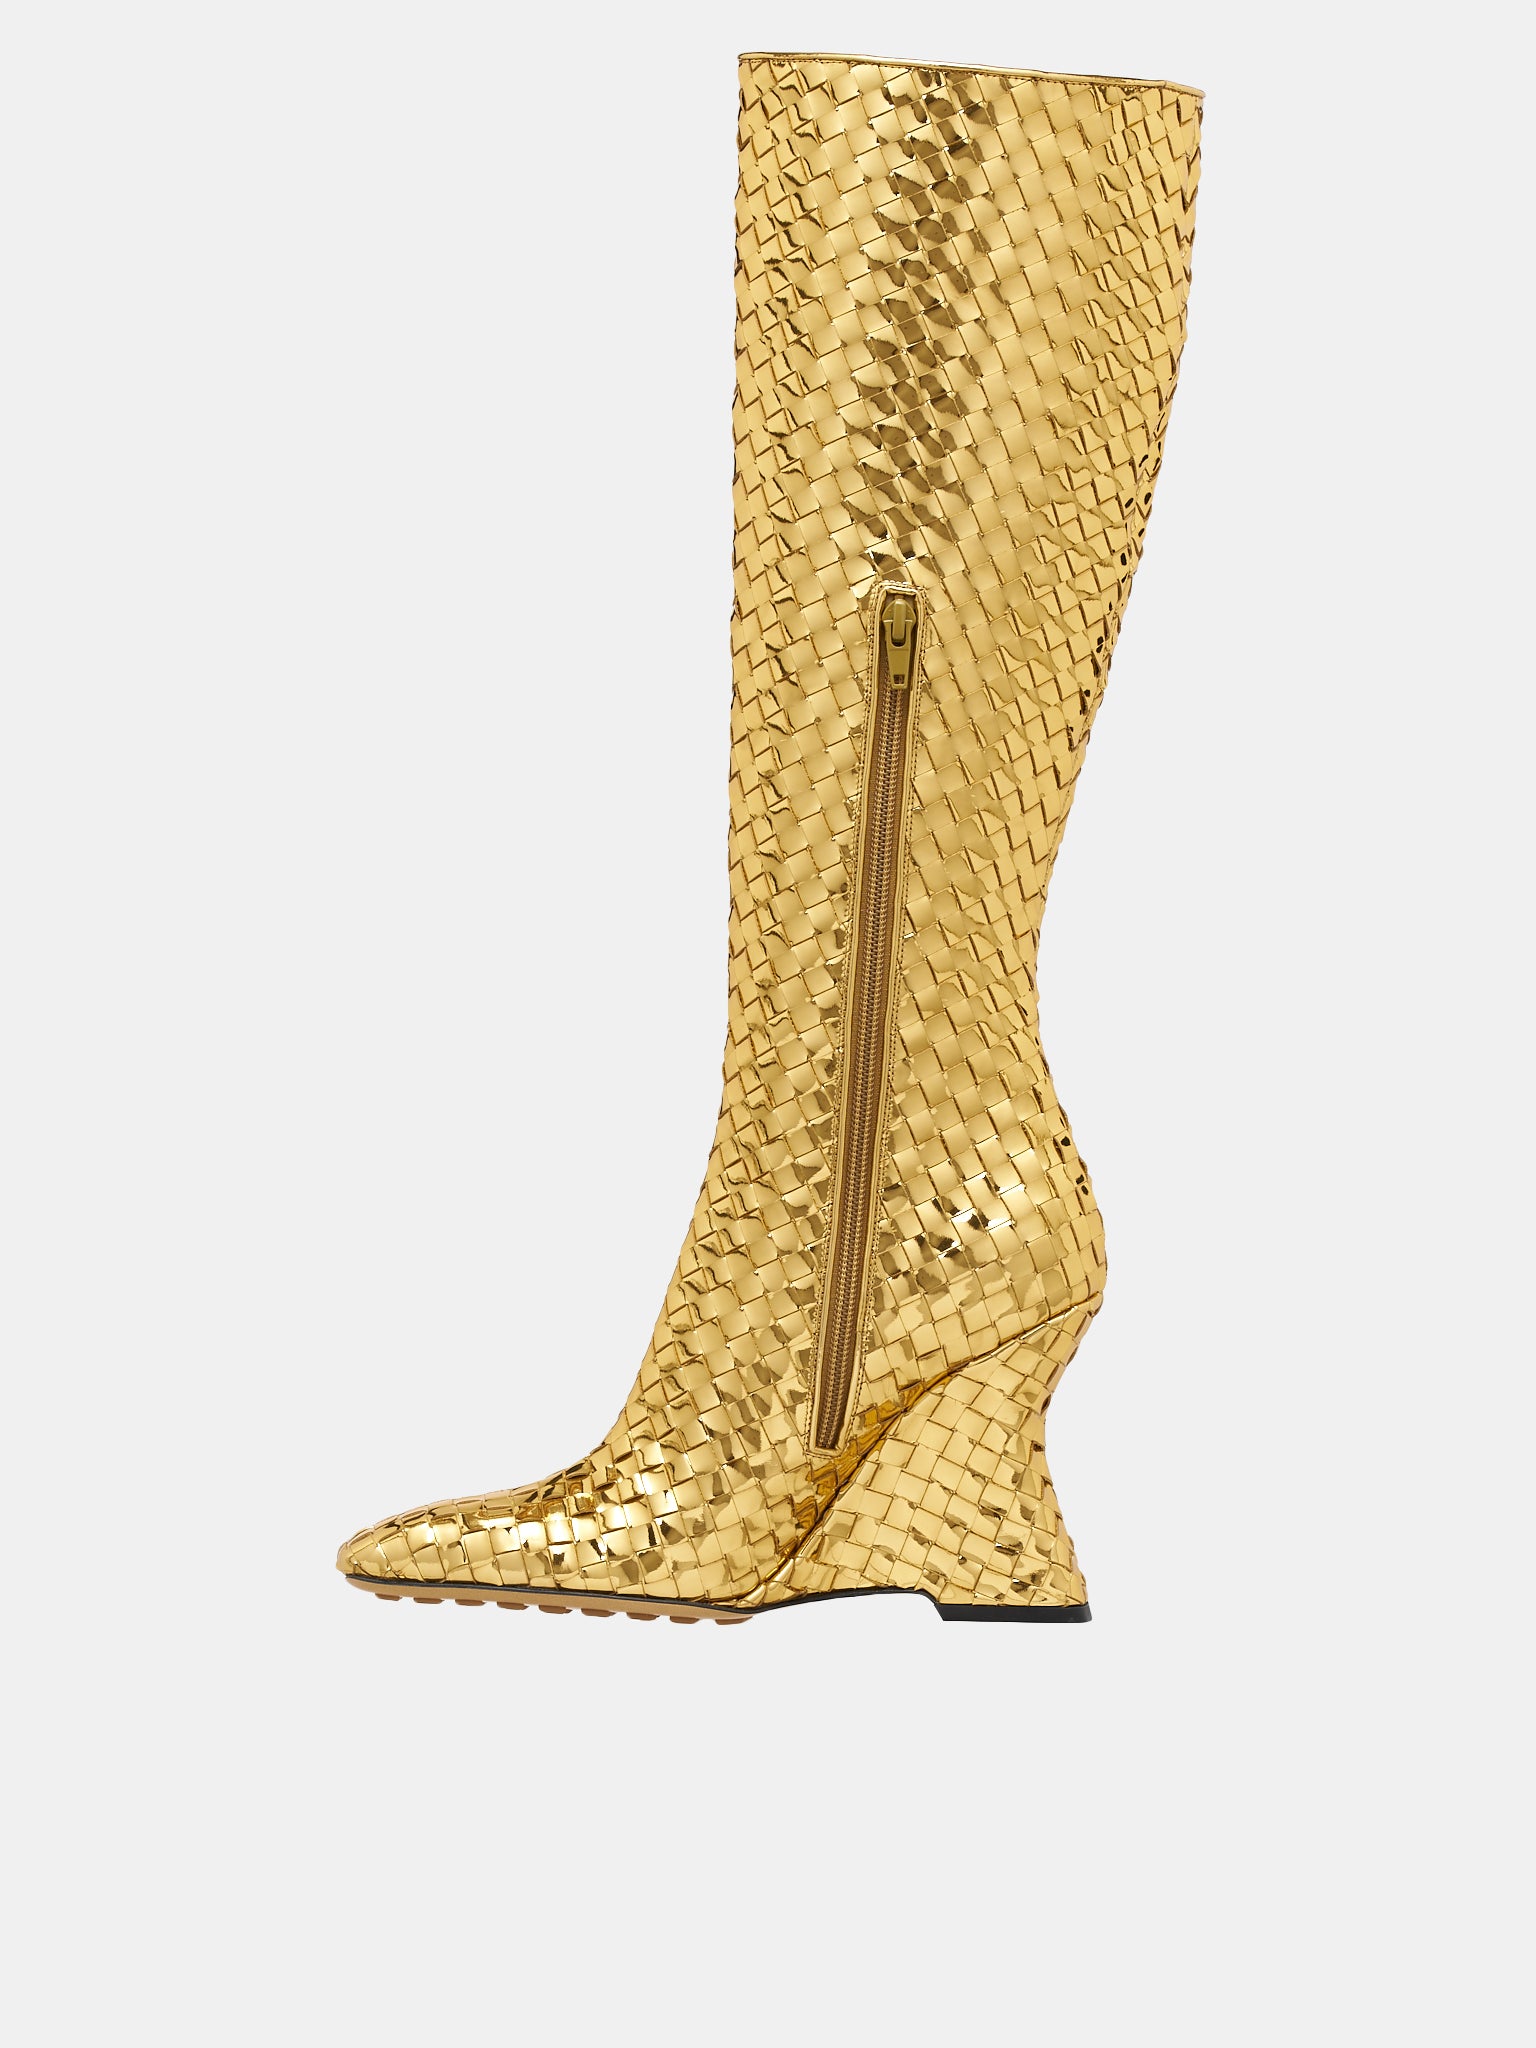 Canalazzo Boots (748568V2WS0-GOLD)